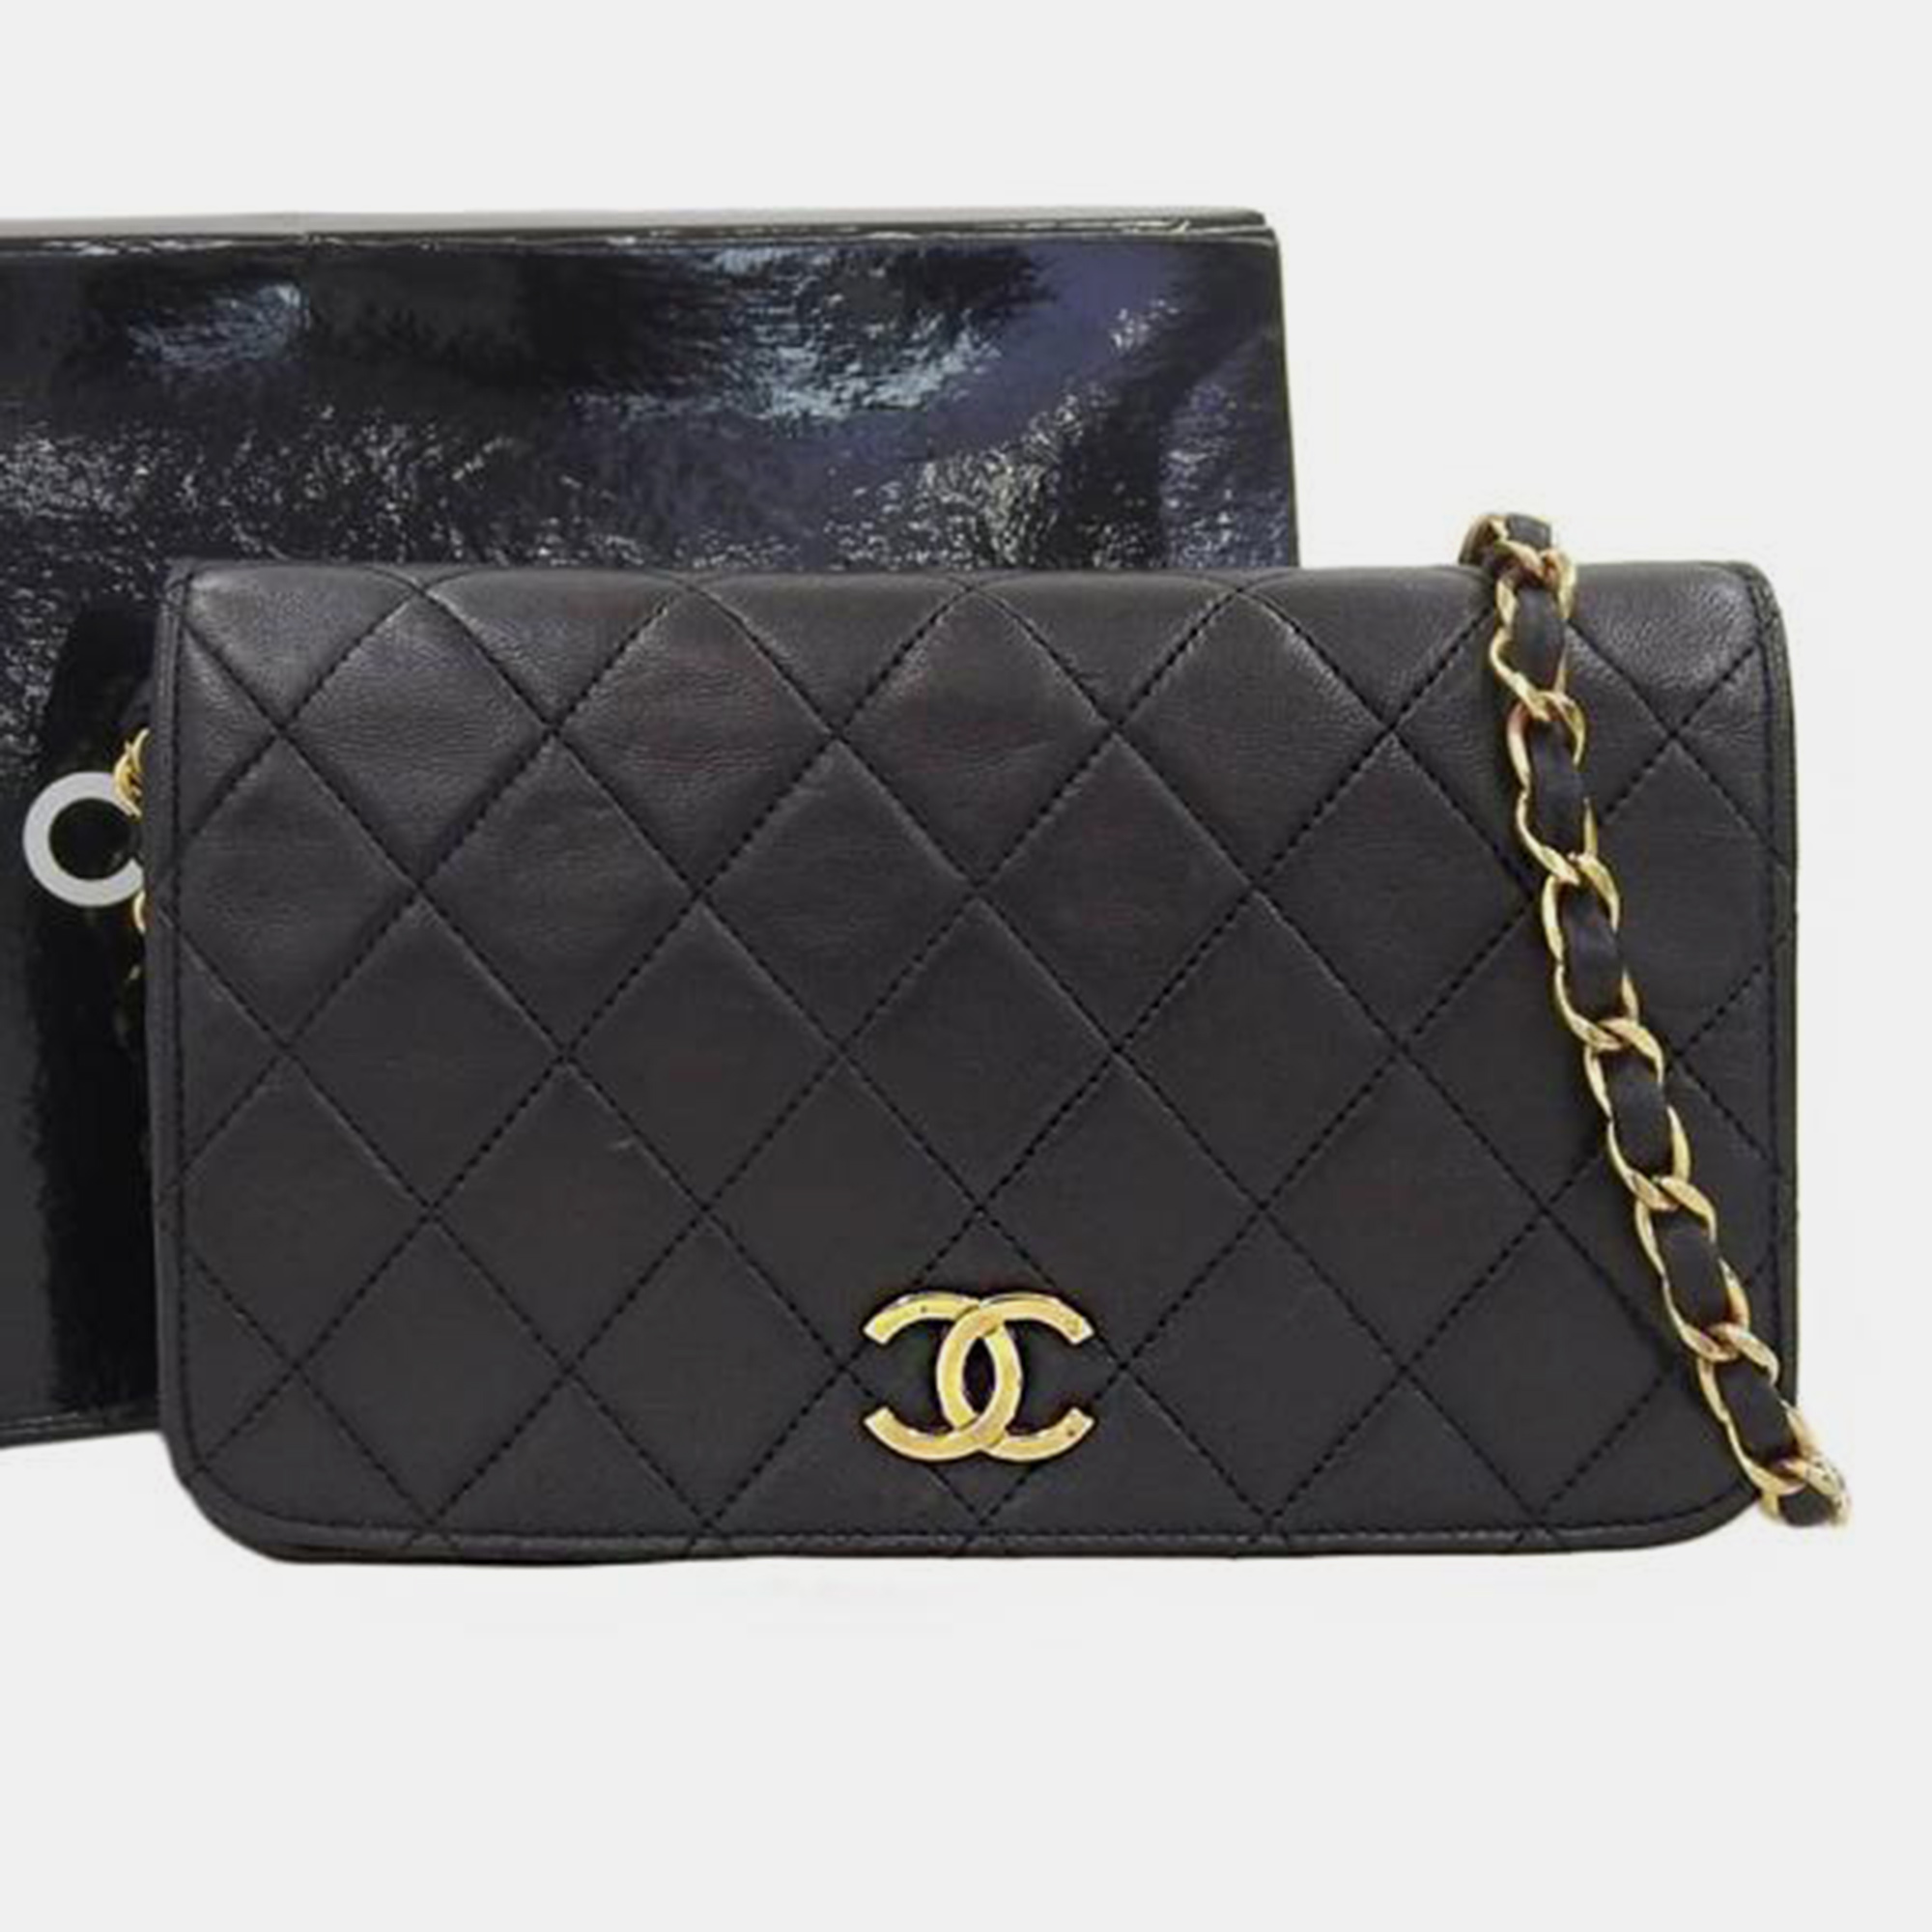 Chanel black cc quilted leather full flap bag